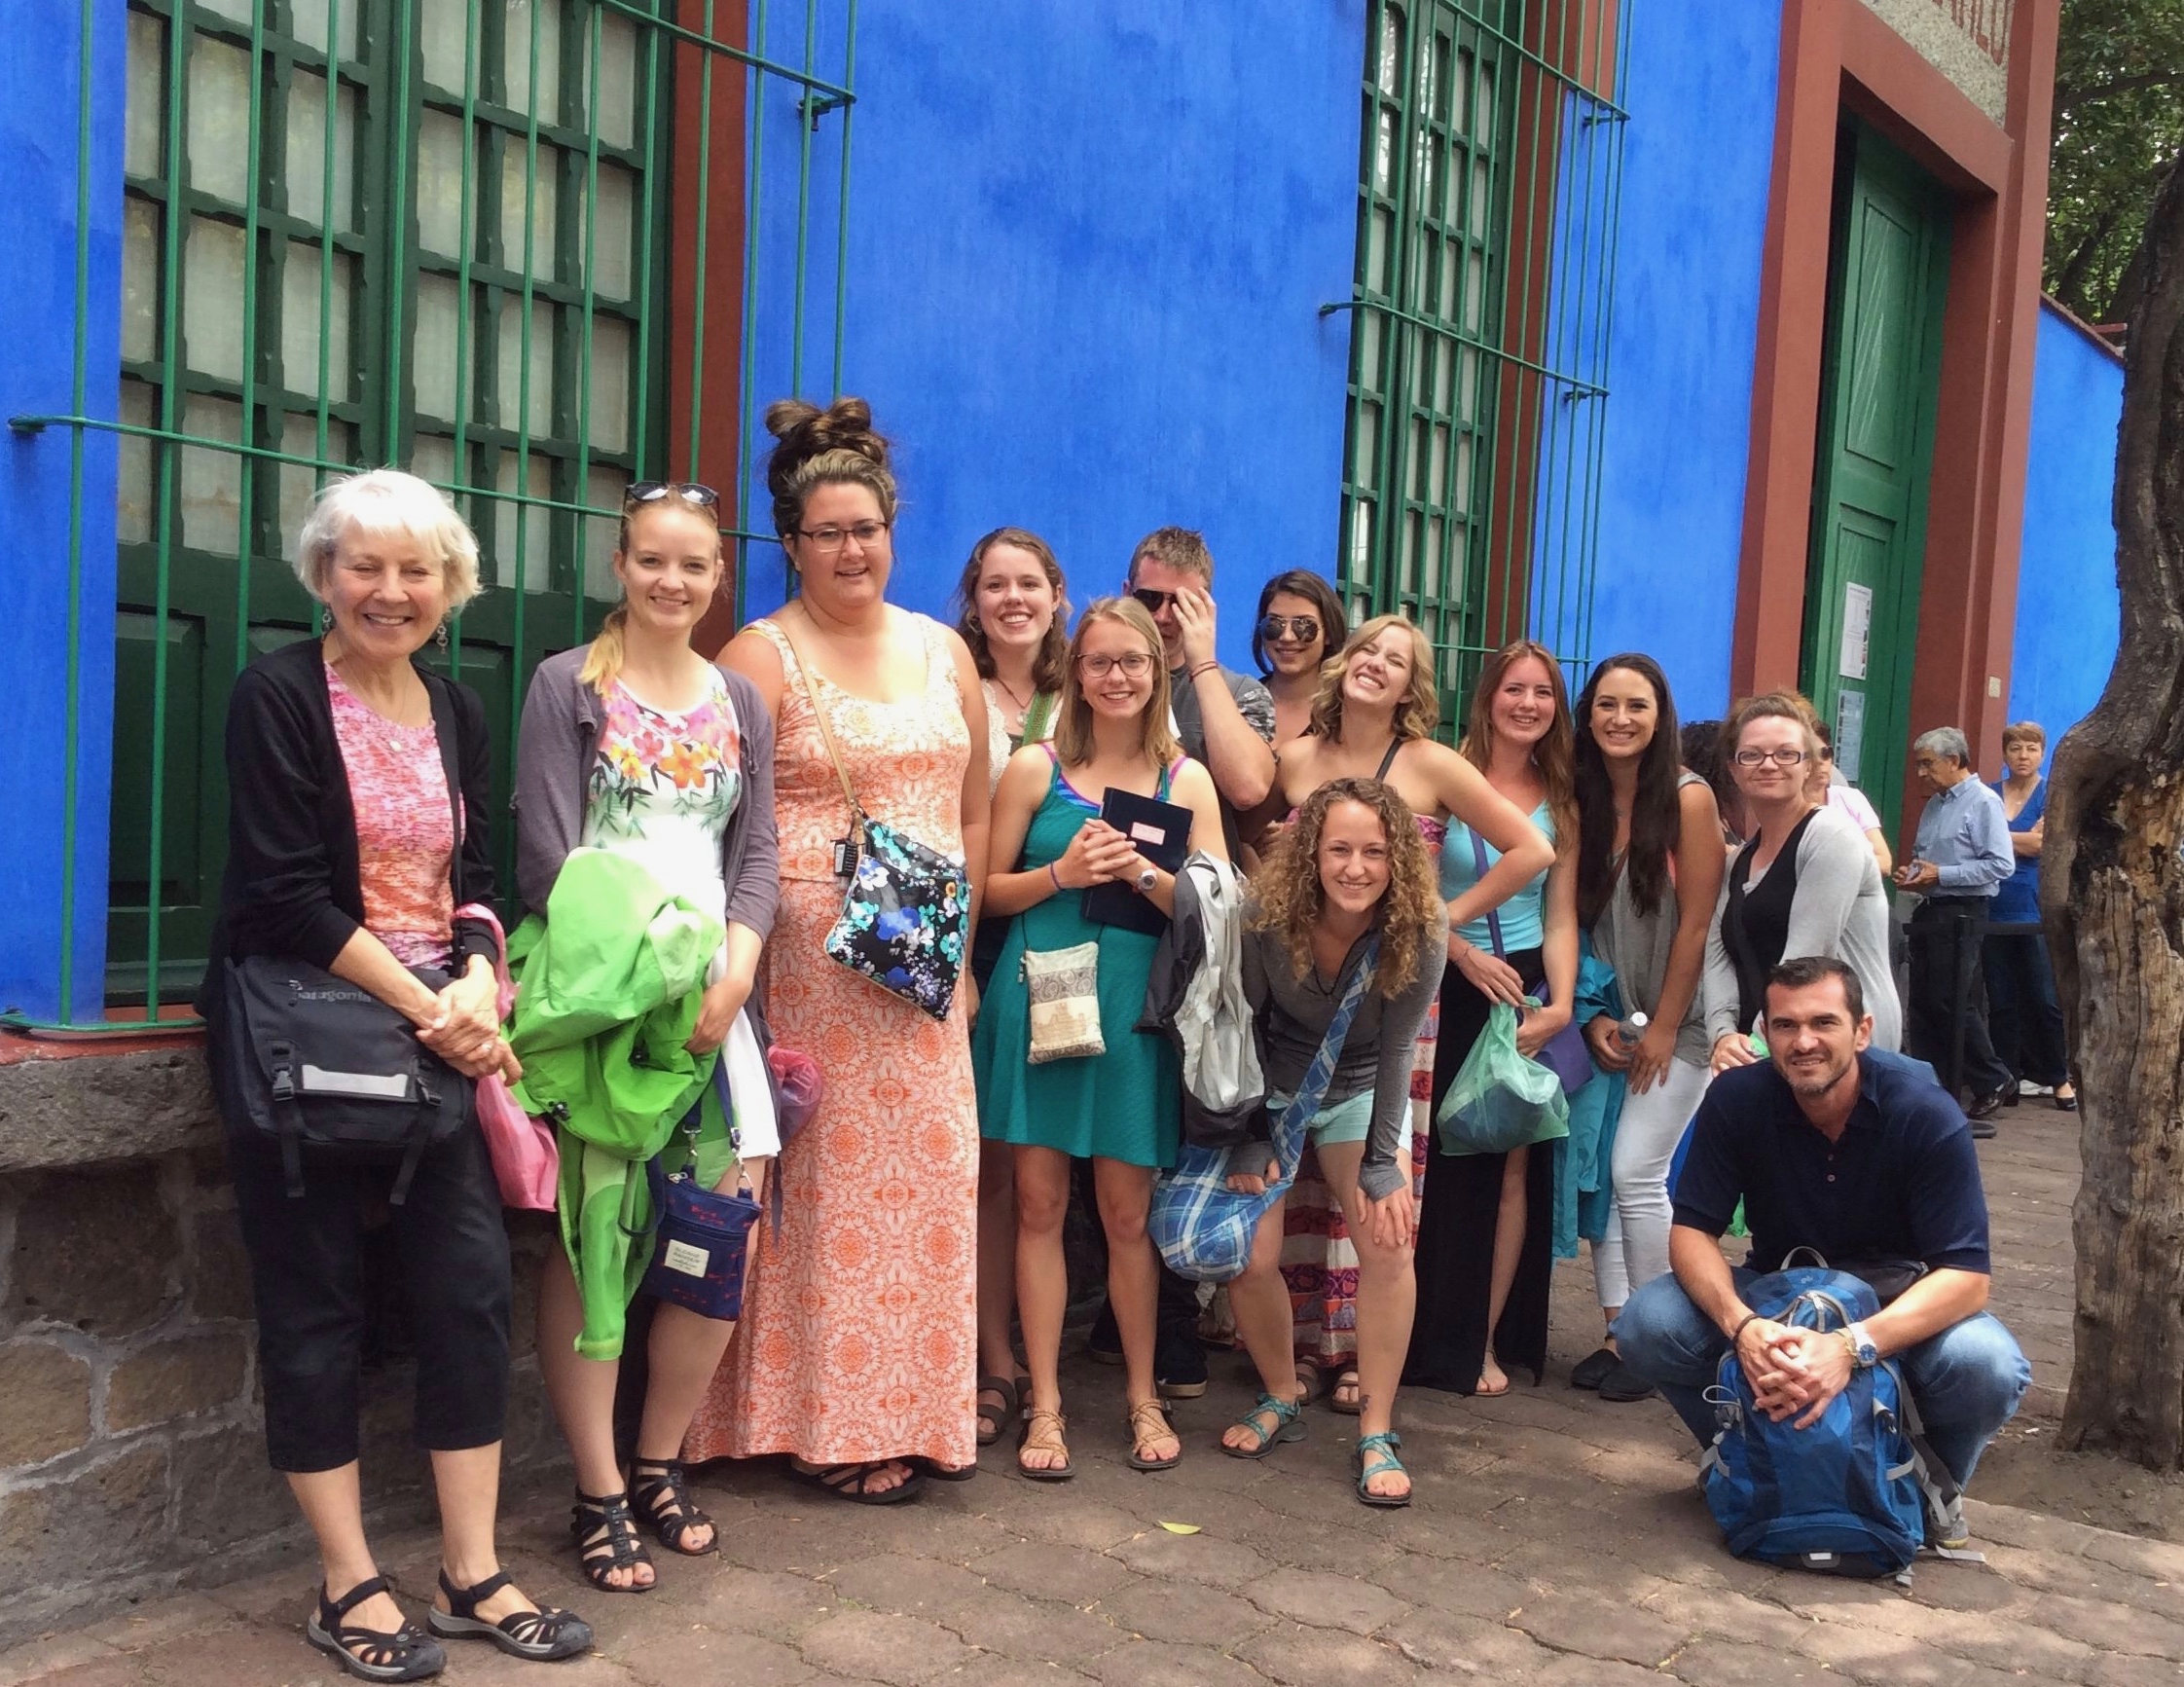 MSU students gathered outside Museo Frida Kahlo in Mexico City, Mexico